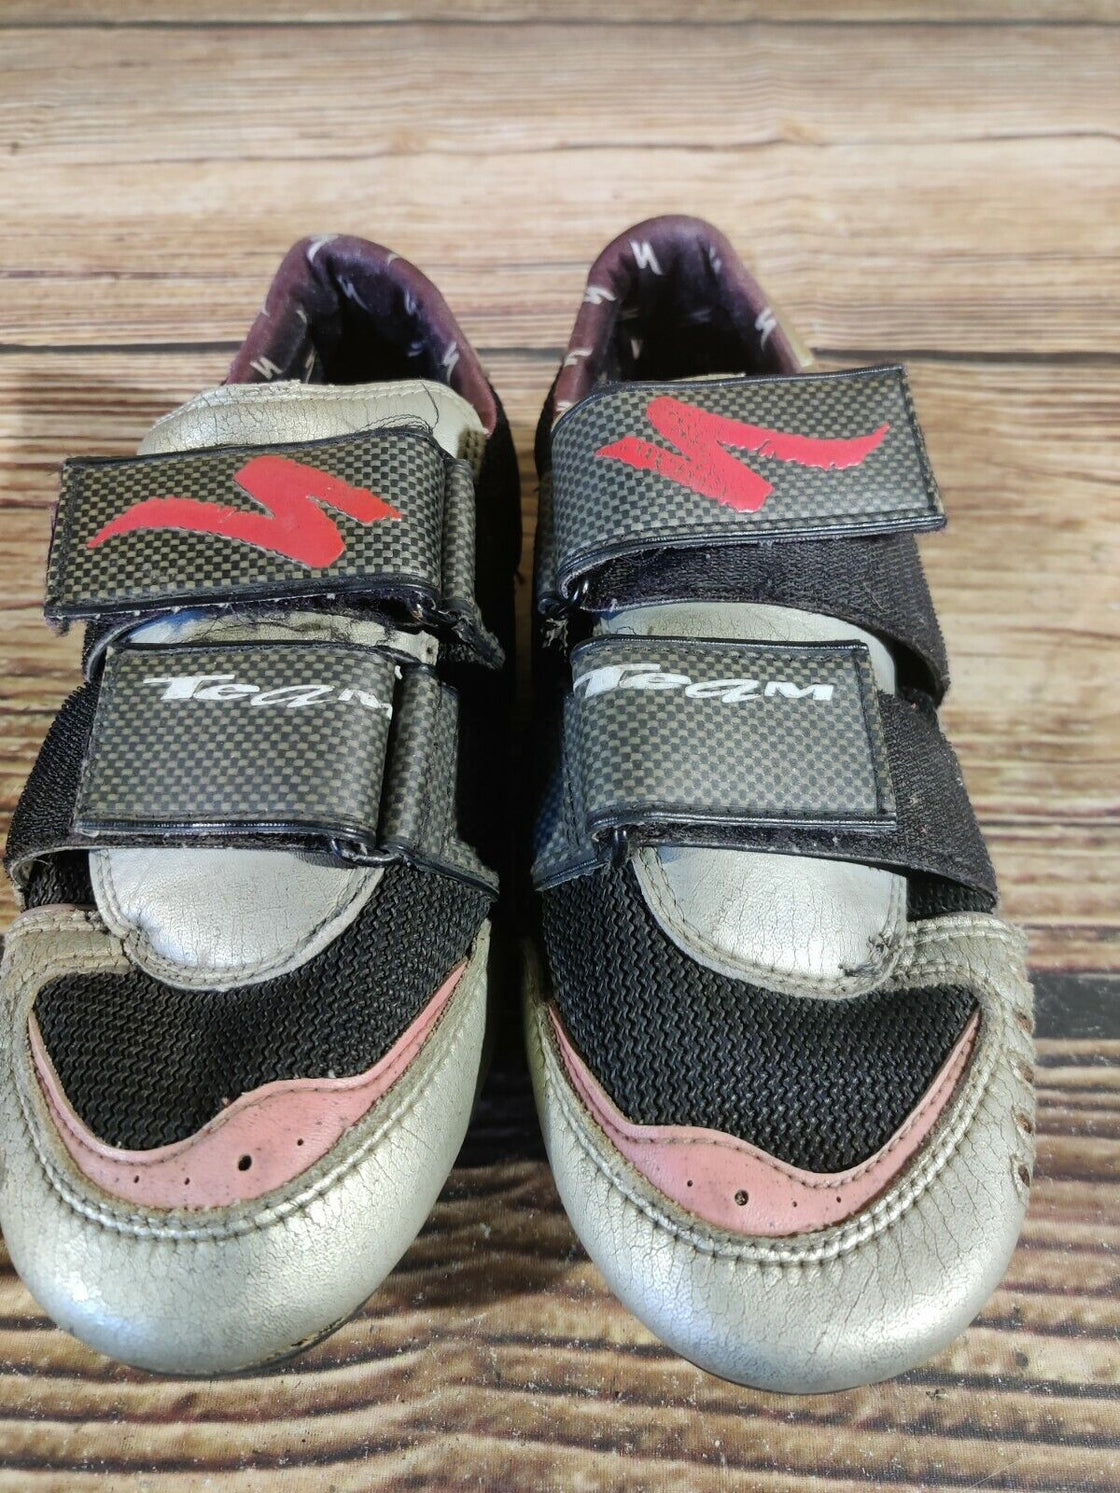 SPECIALIZED Vintage Road Cycling Shoes Biking Boots 3 Bolts Size EU41, US8.5